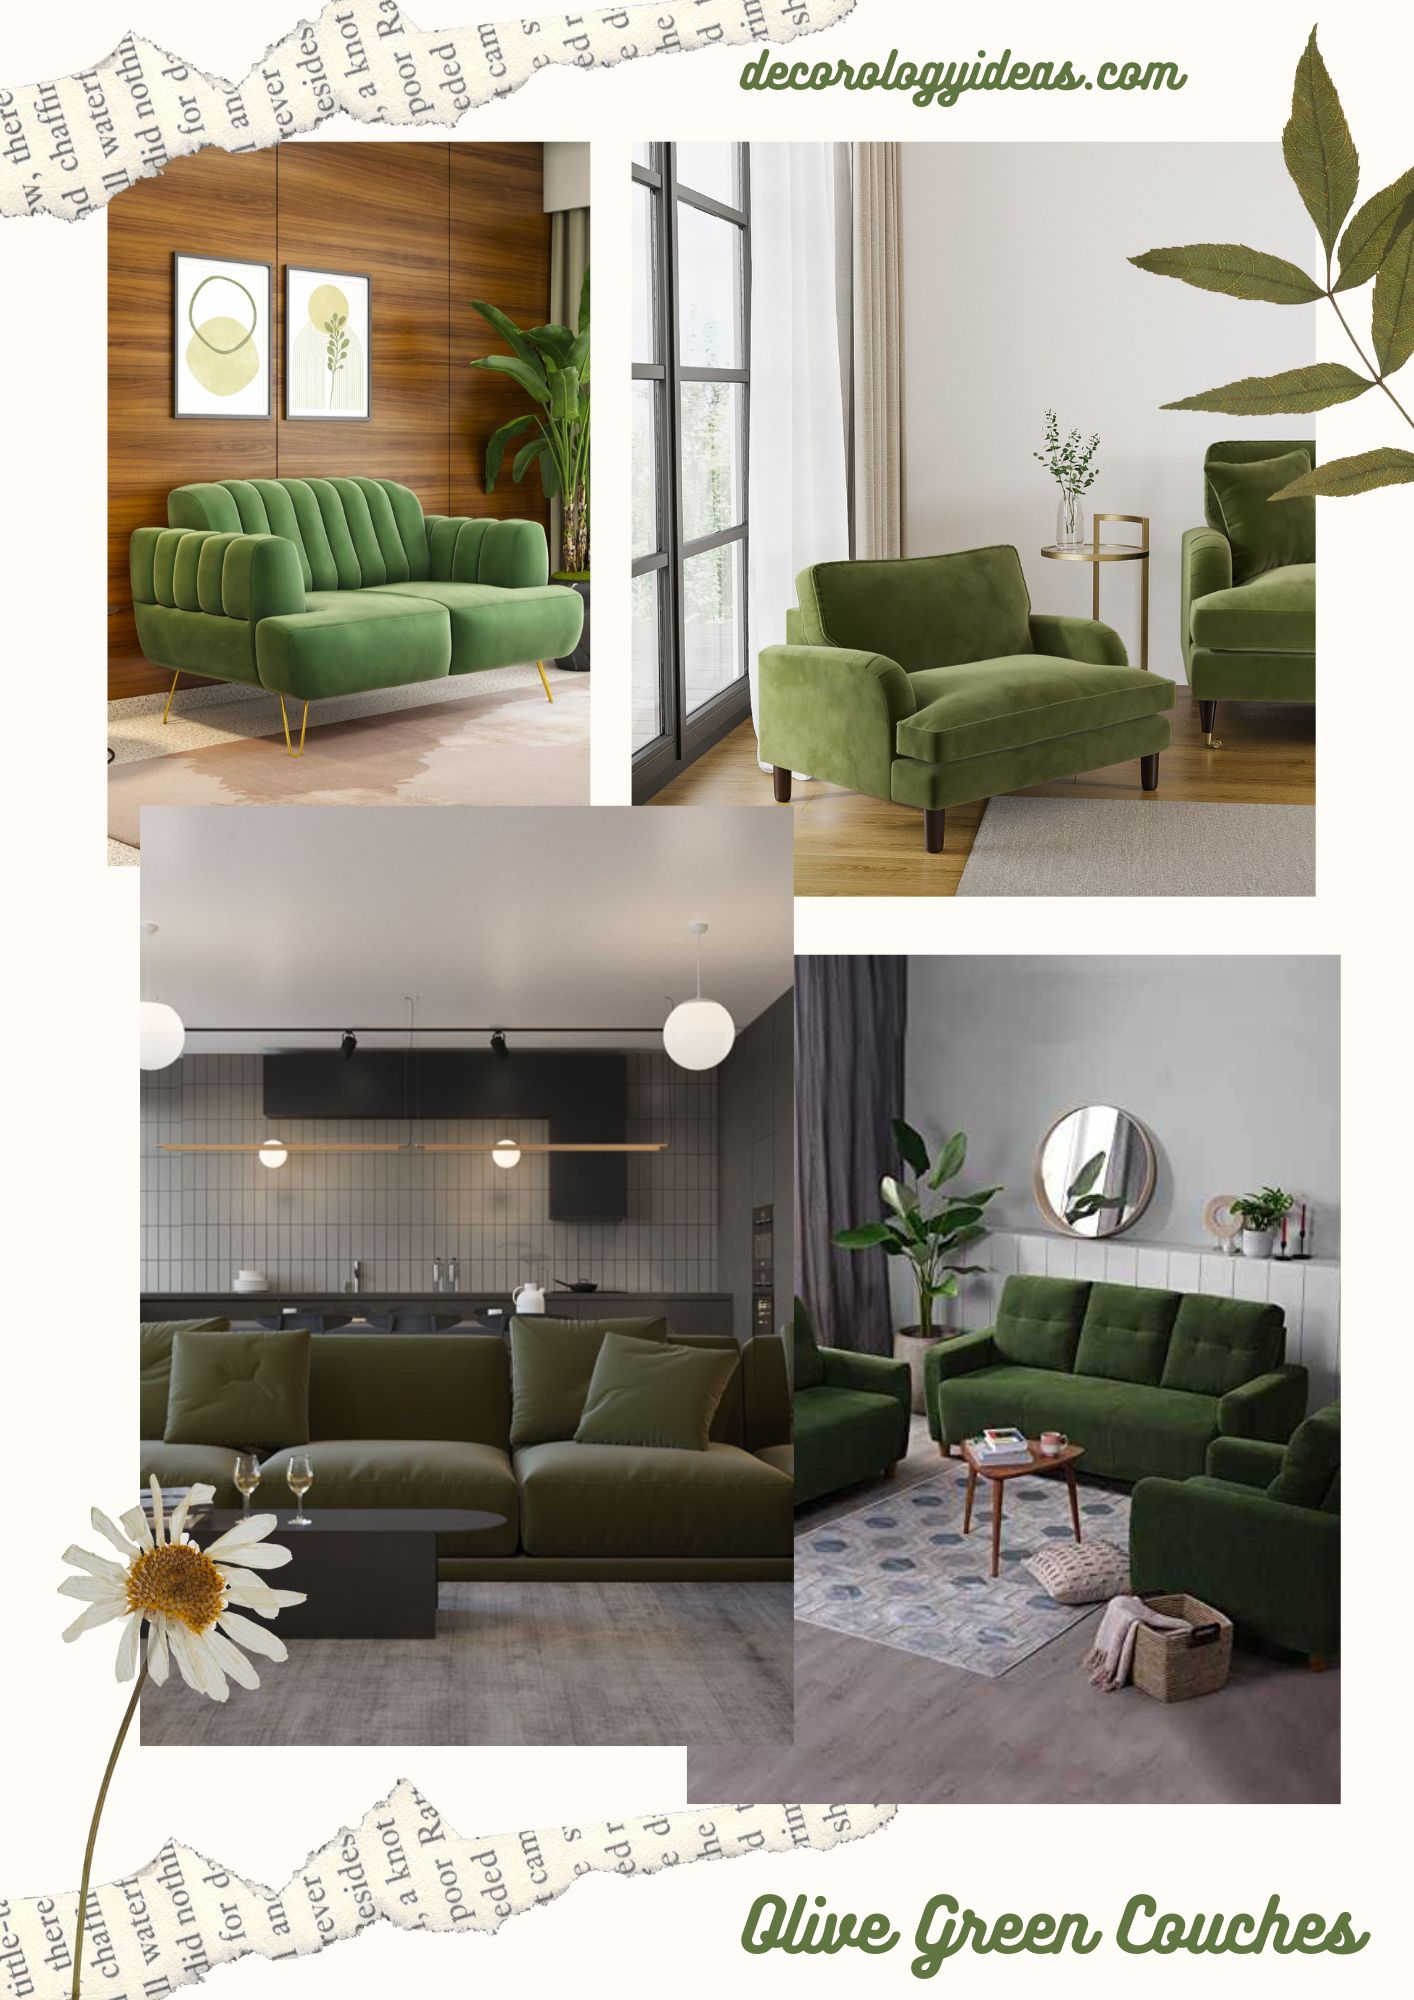 Olive Green Couches